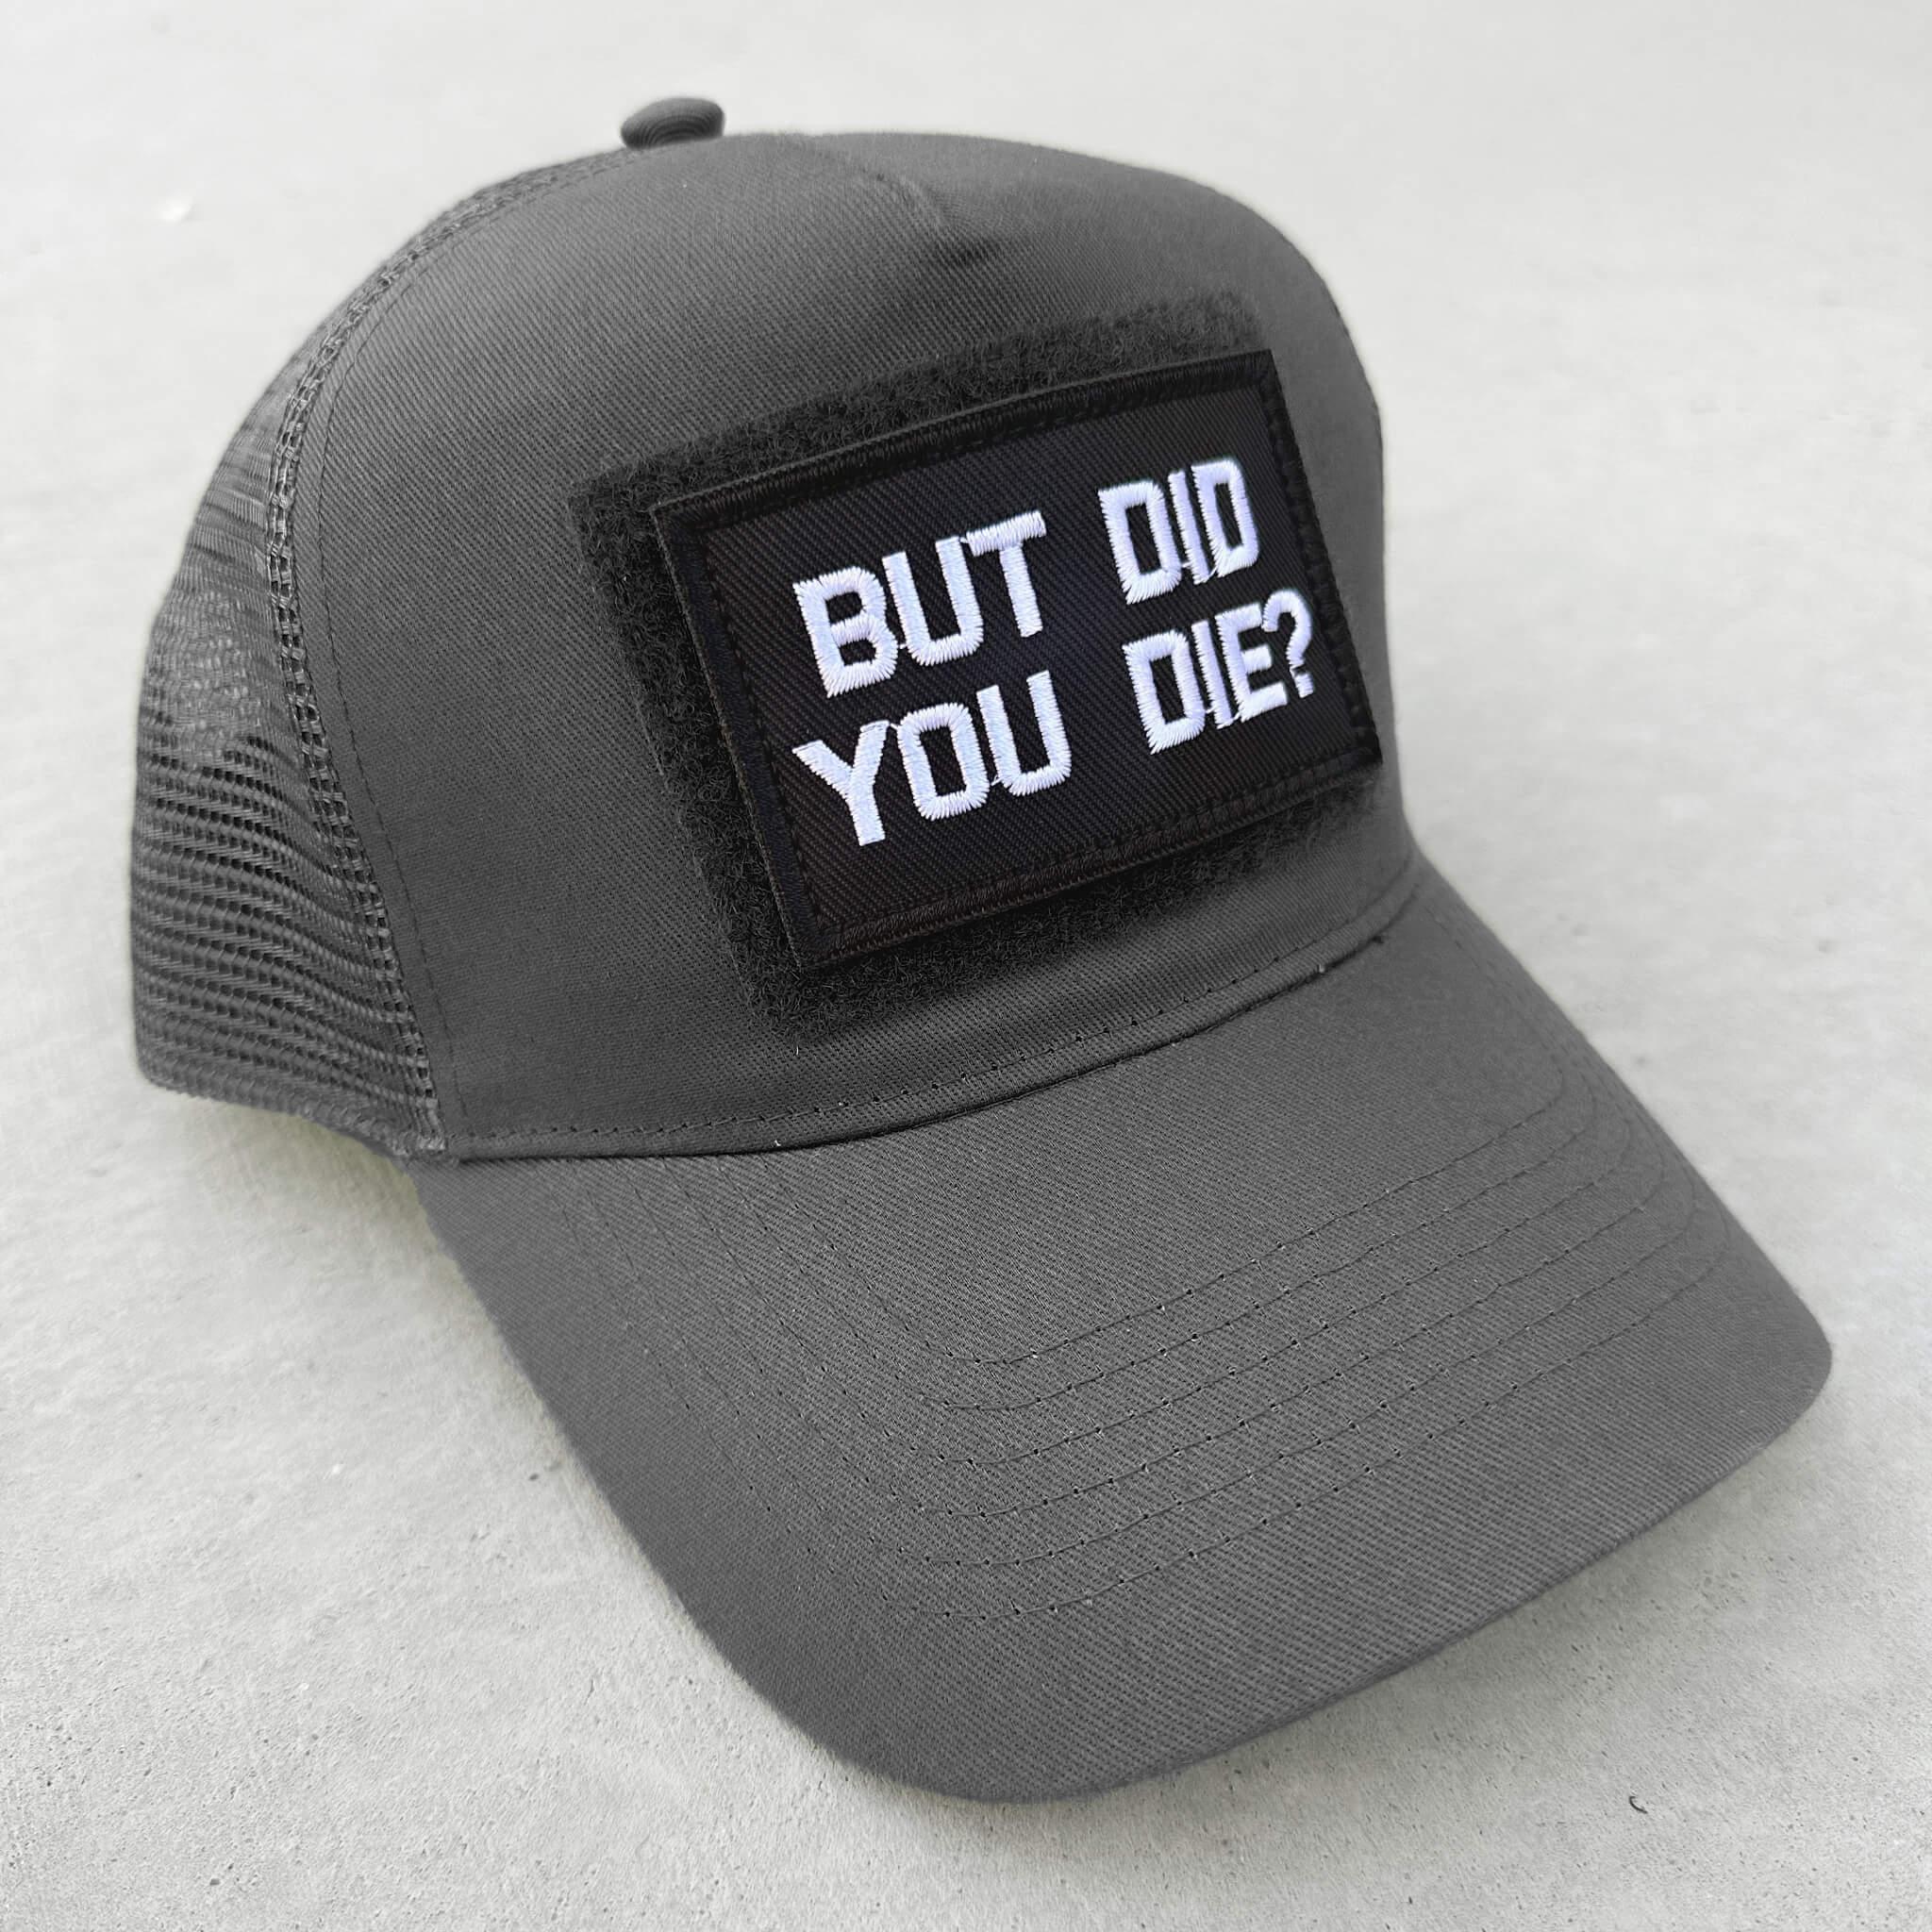 The trucker snapback cap in grey with But Did You Die patch attached